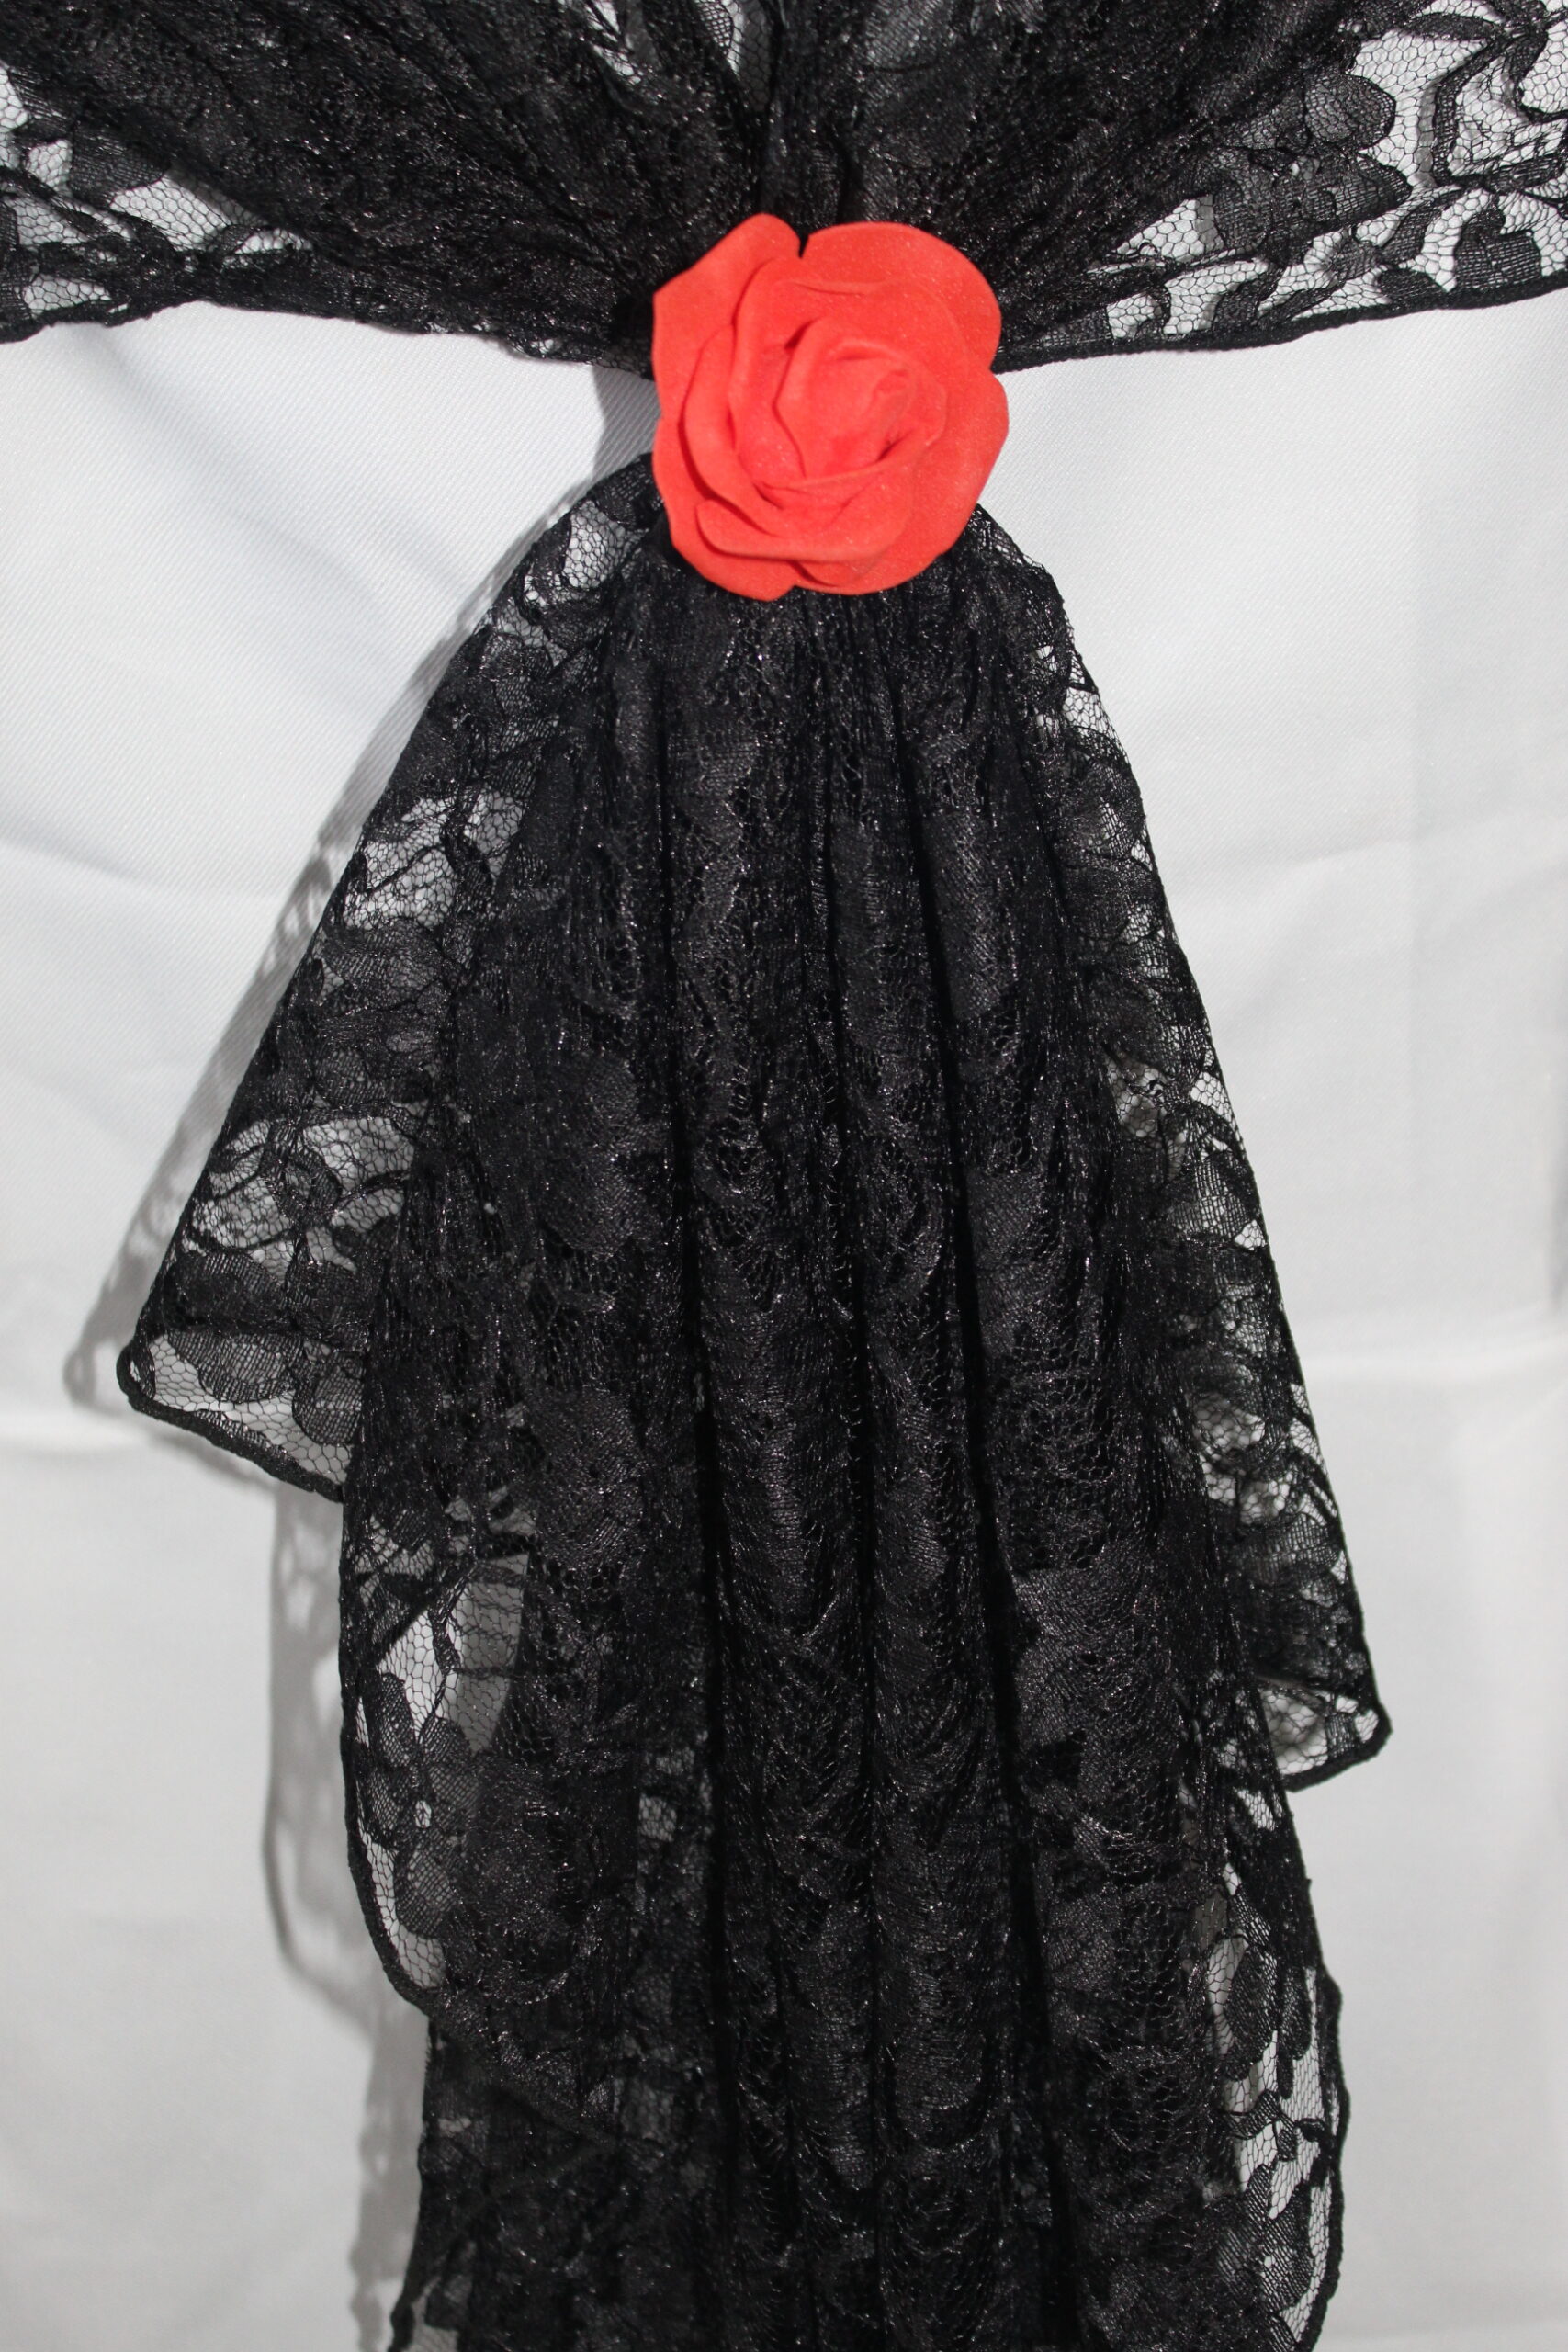 Black lace chair hood with rose